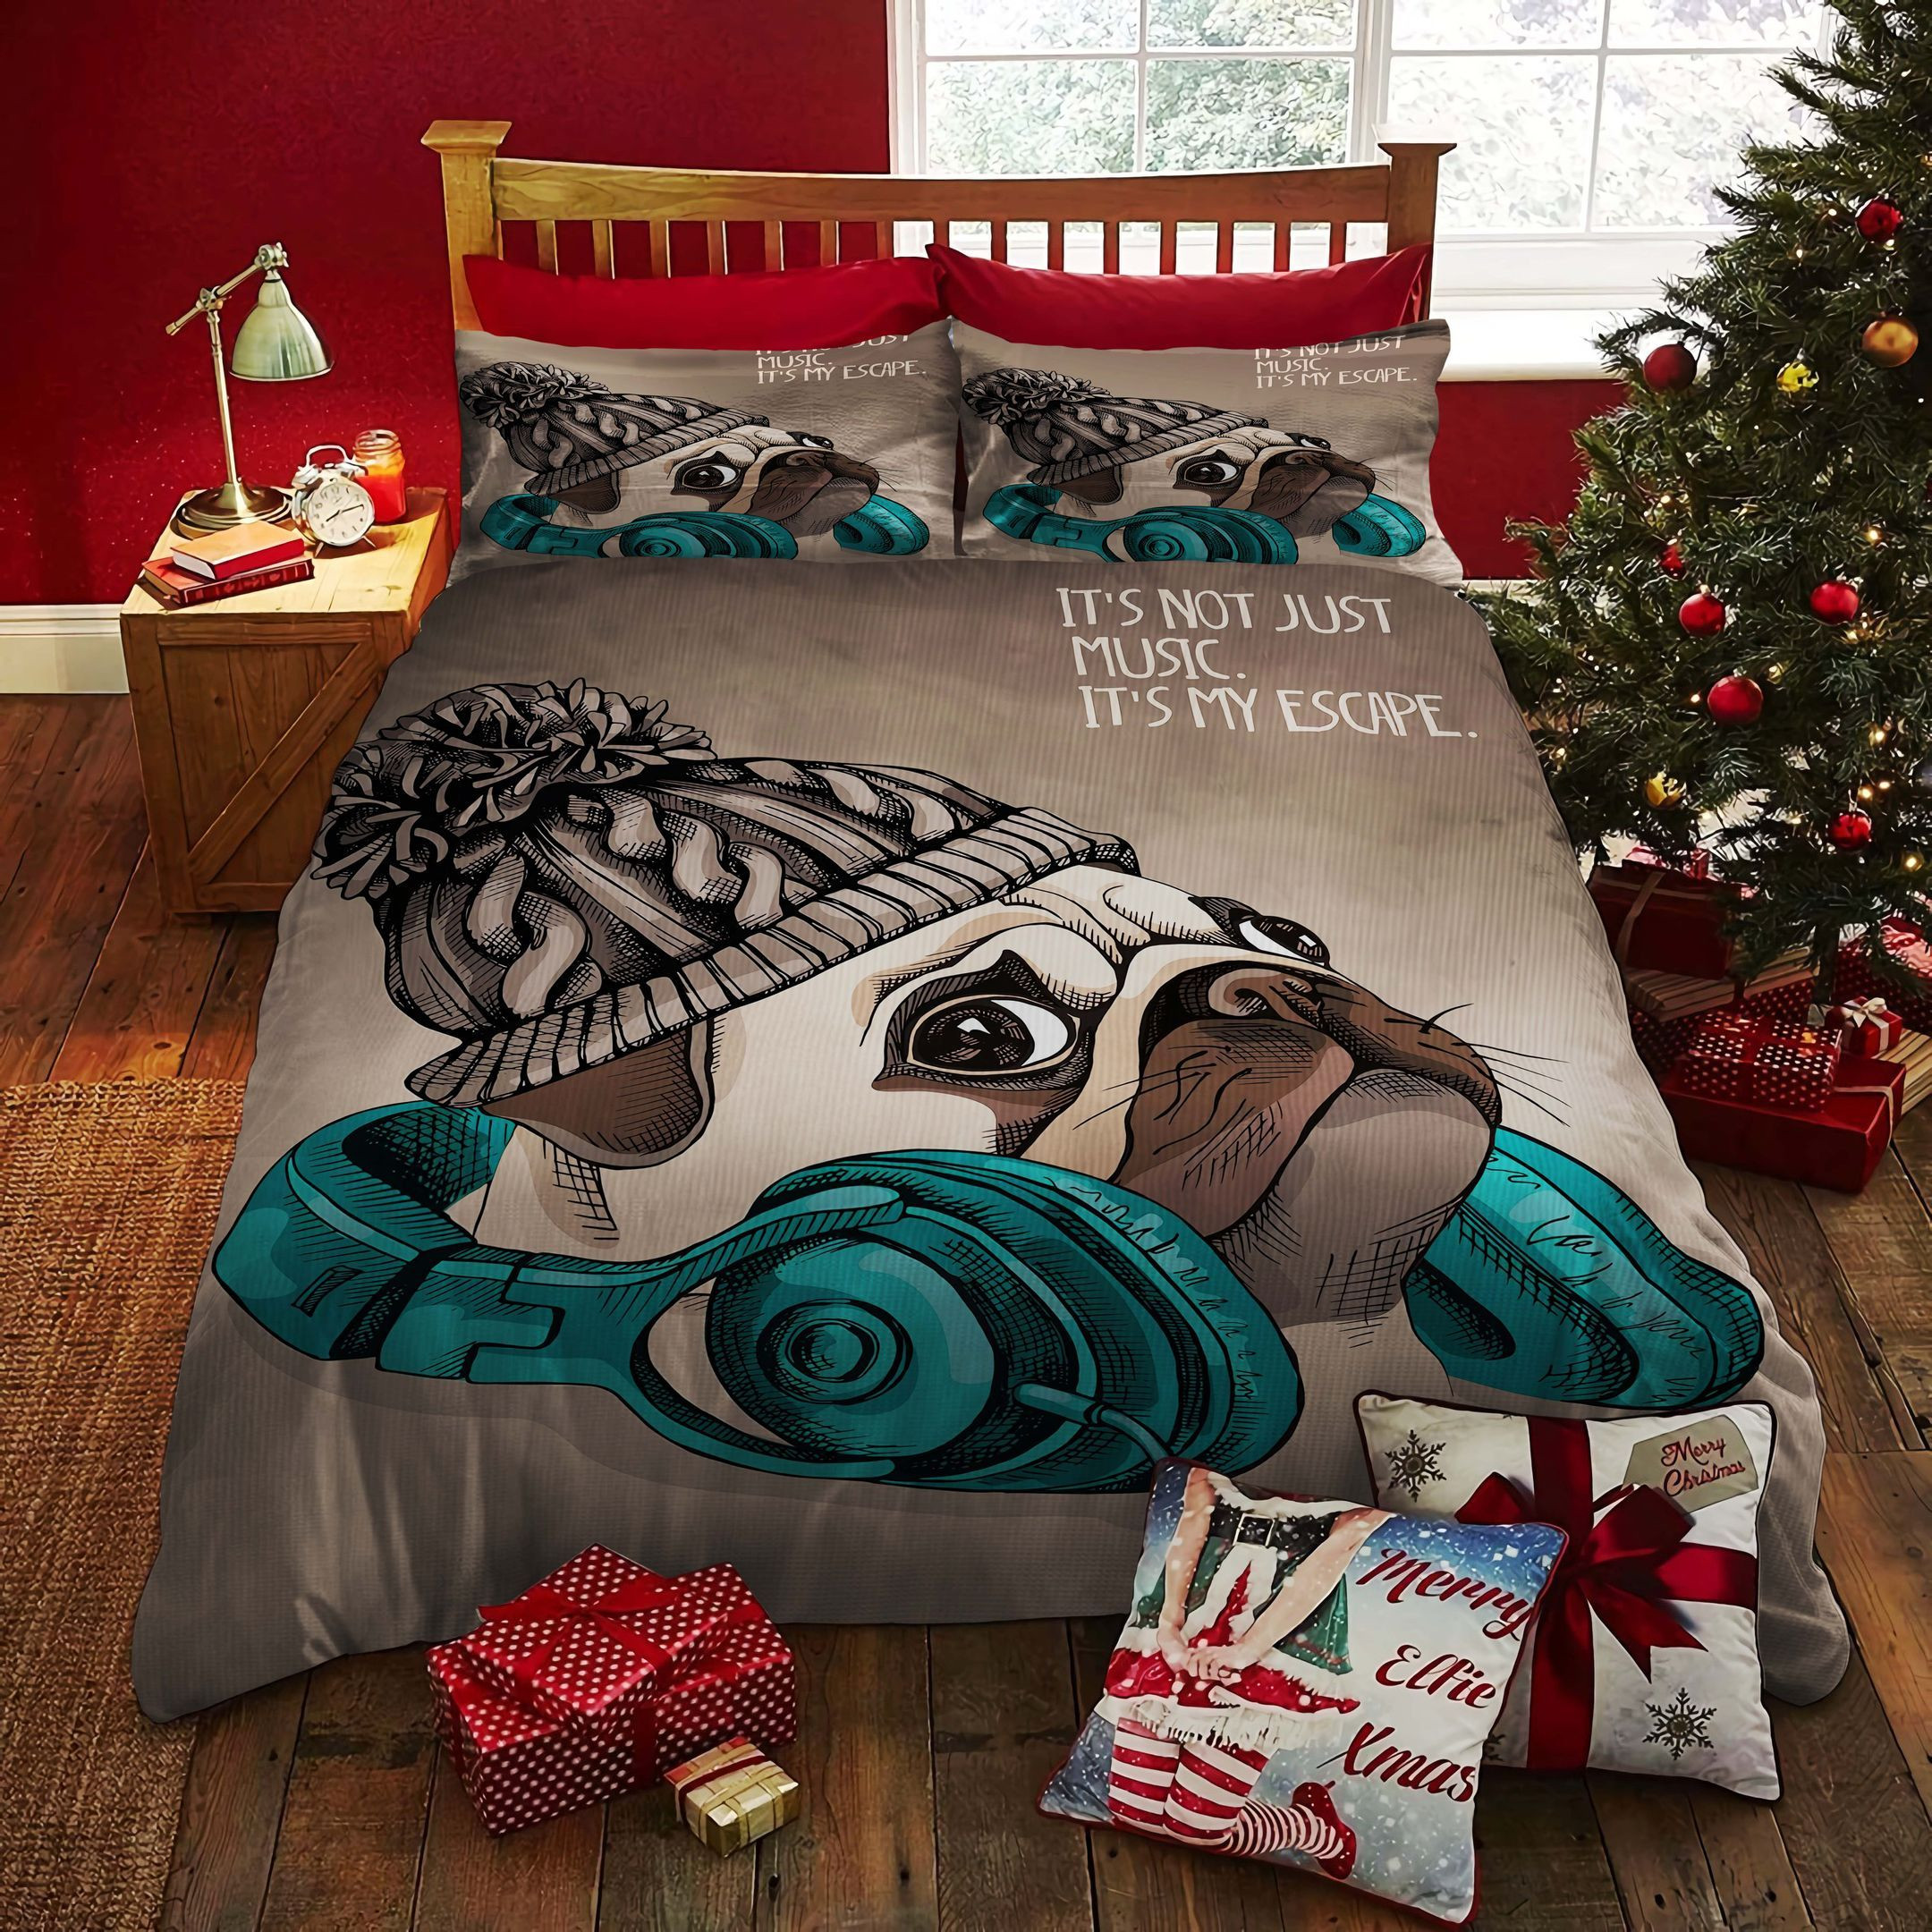 pug themed music bedding set perfect presents for birthdays christmas and thanksgiving vrg3y